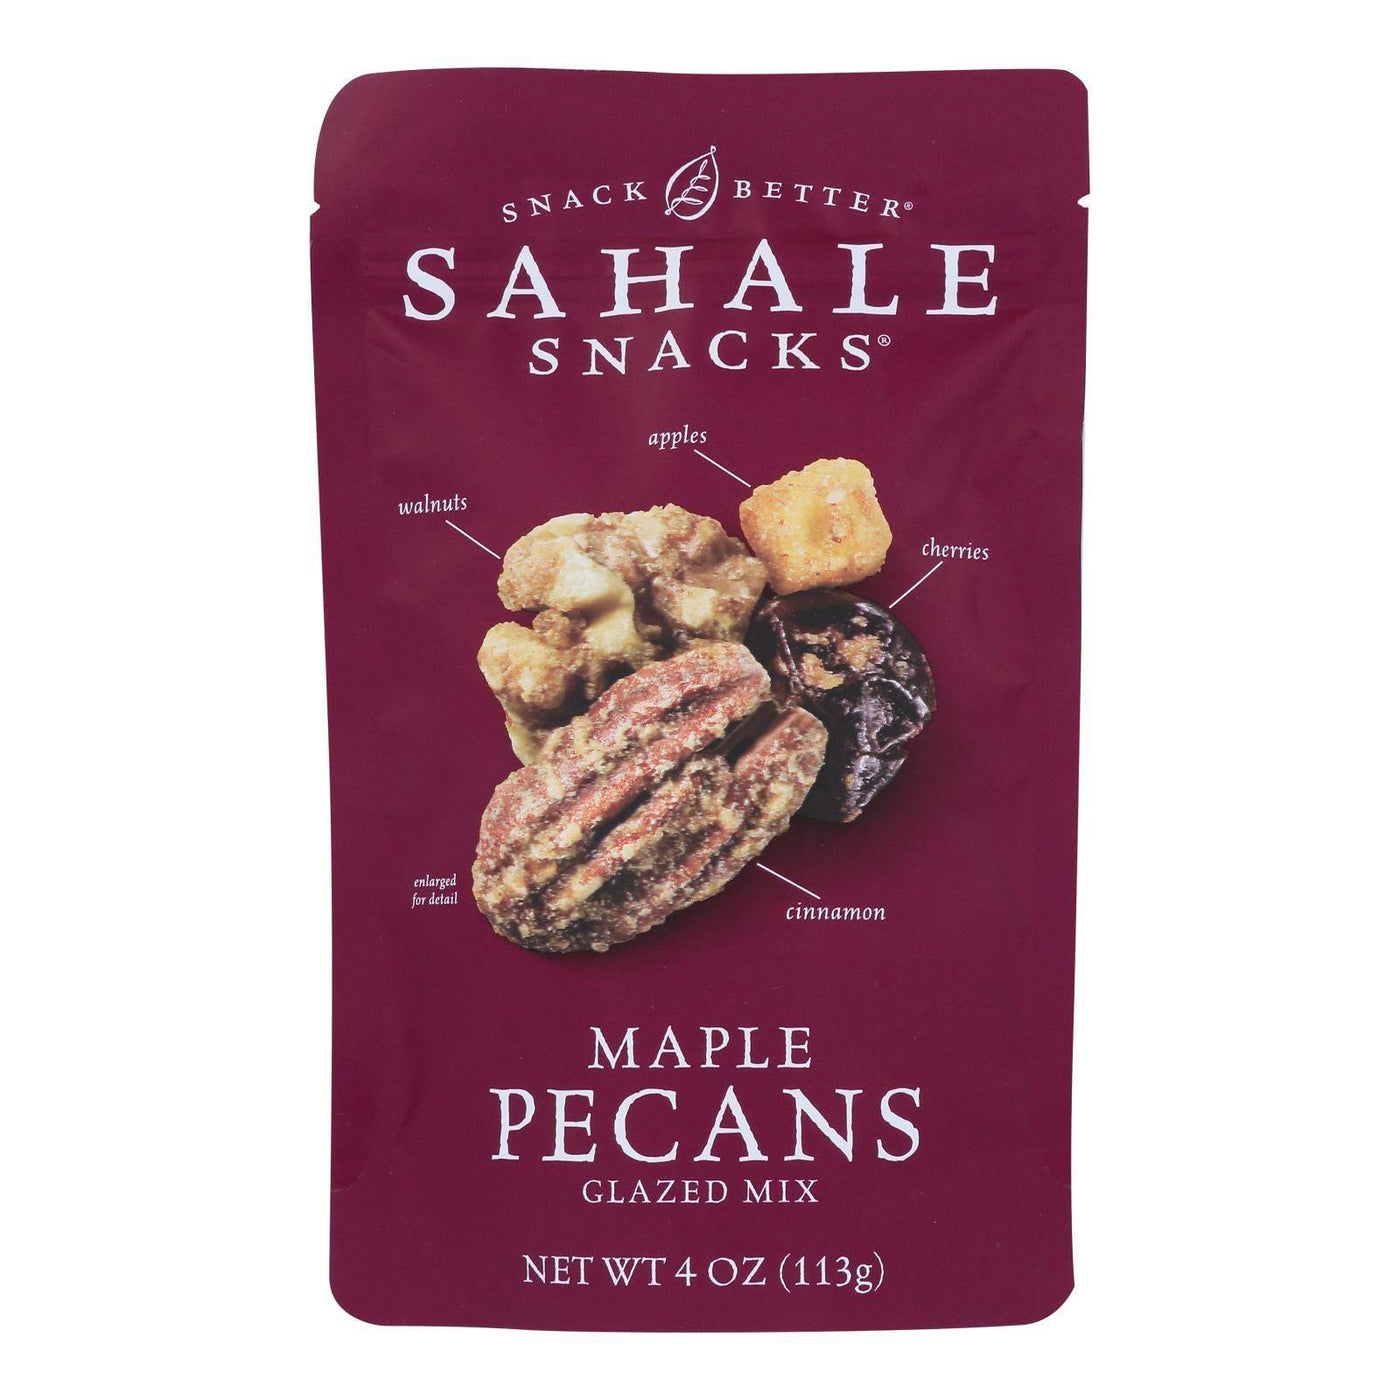 Buy Sahale Snacks Glazed Mix - Maple Pecans - Case Of 6 - 4 Oz.  at OnlyNaturals.us